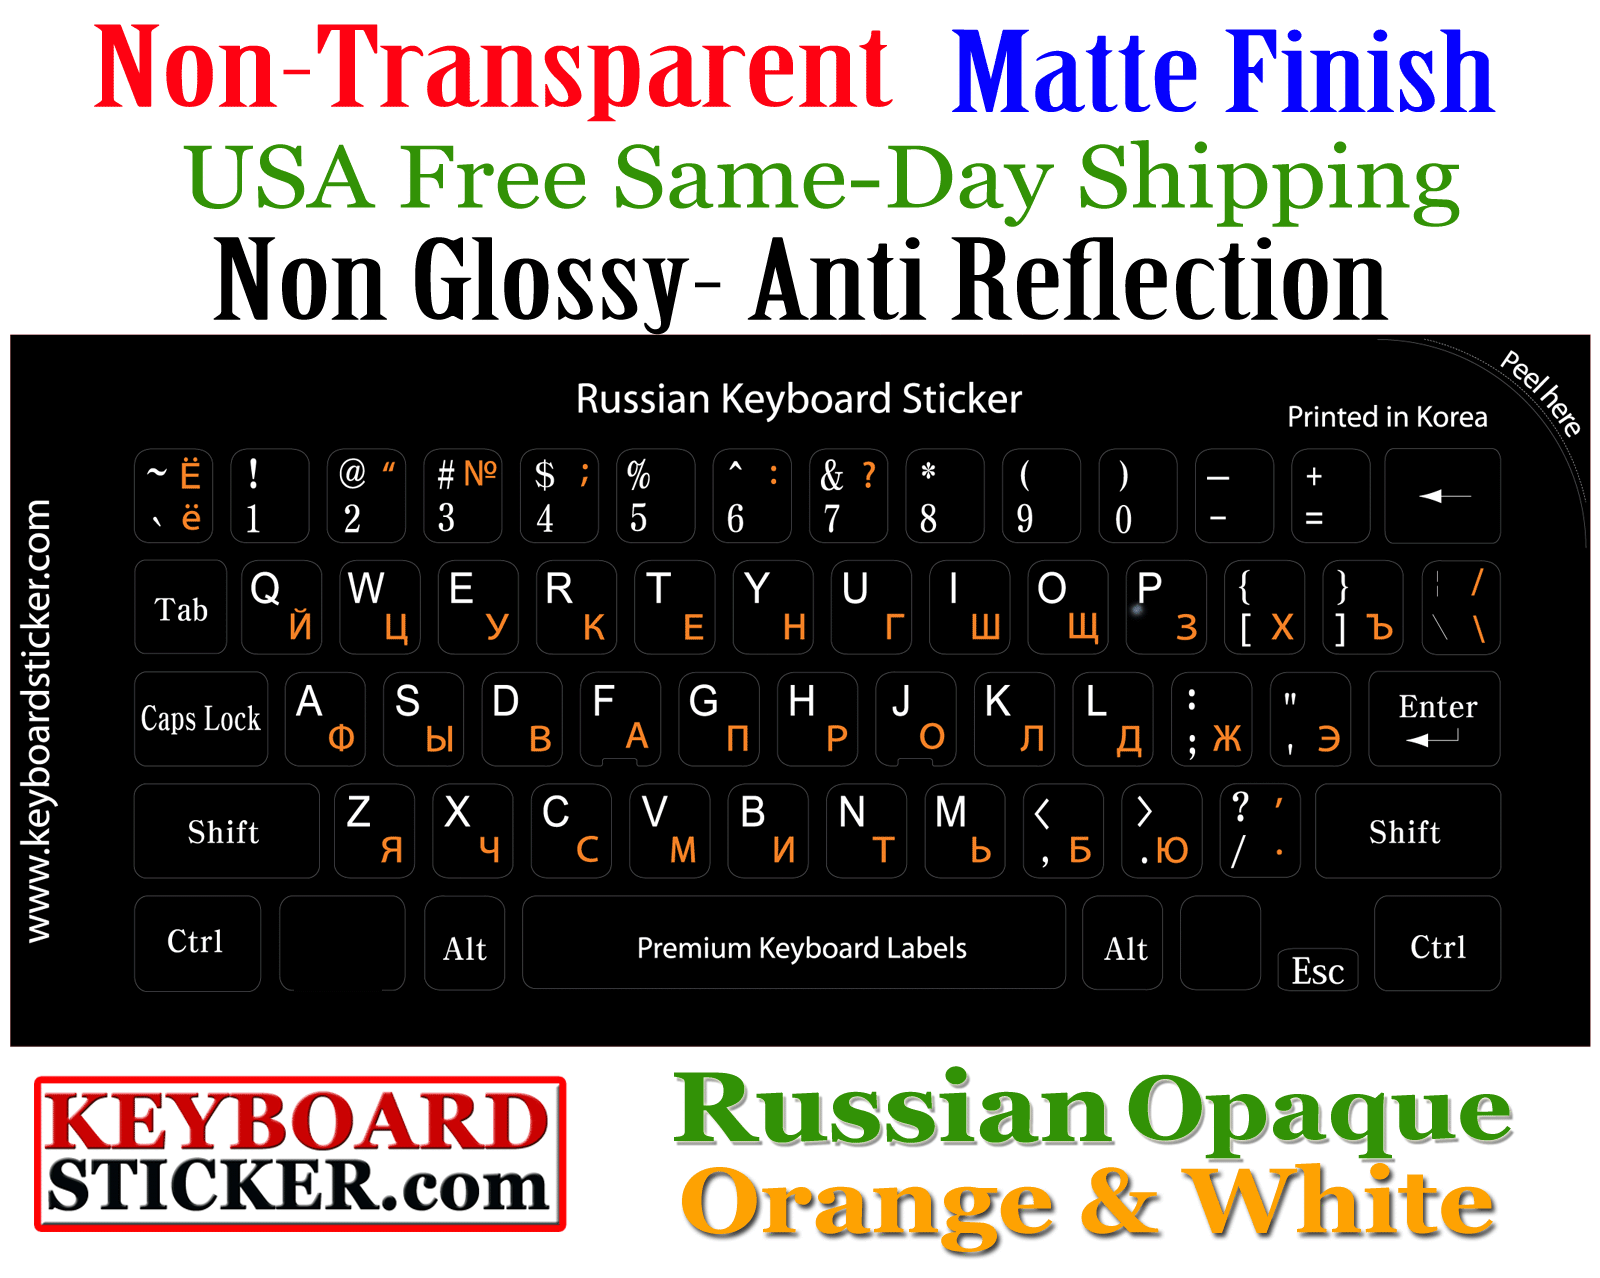 Russian Opaque Keyboard Sticker. Non Transparent. Best Quality Guaranteed!